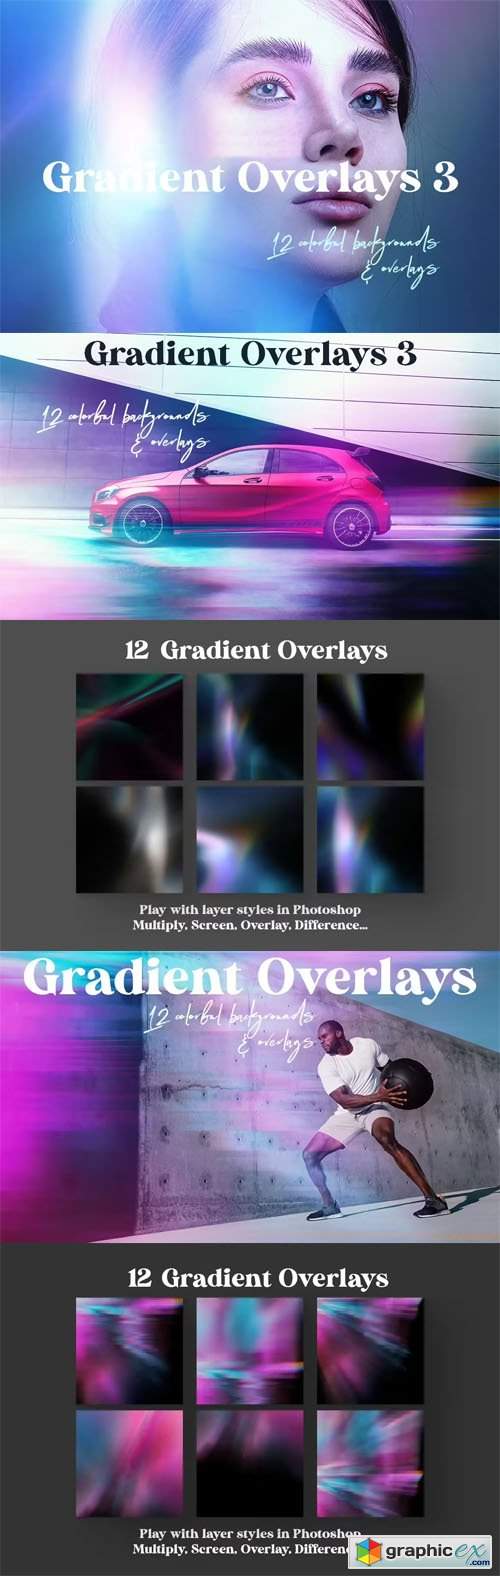  Gradient Overlays Vol.3 - 12 Colorful Backgrounds 